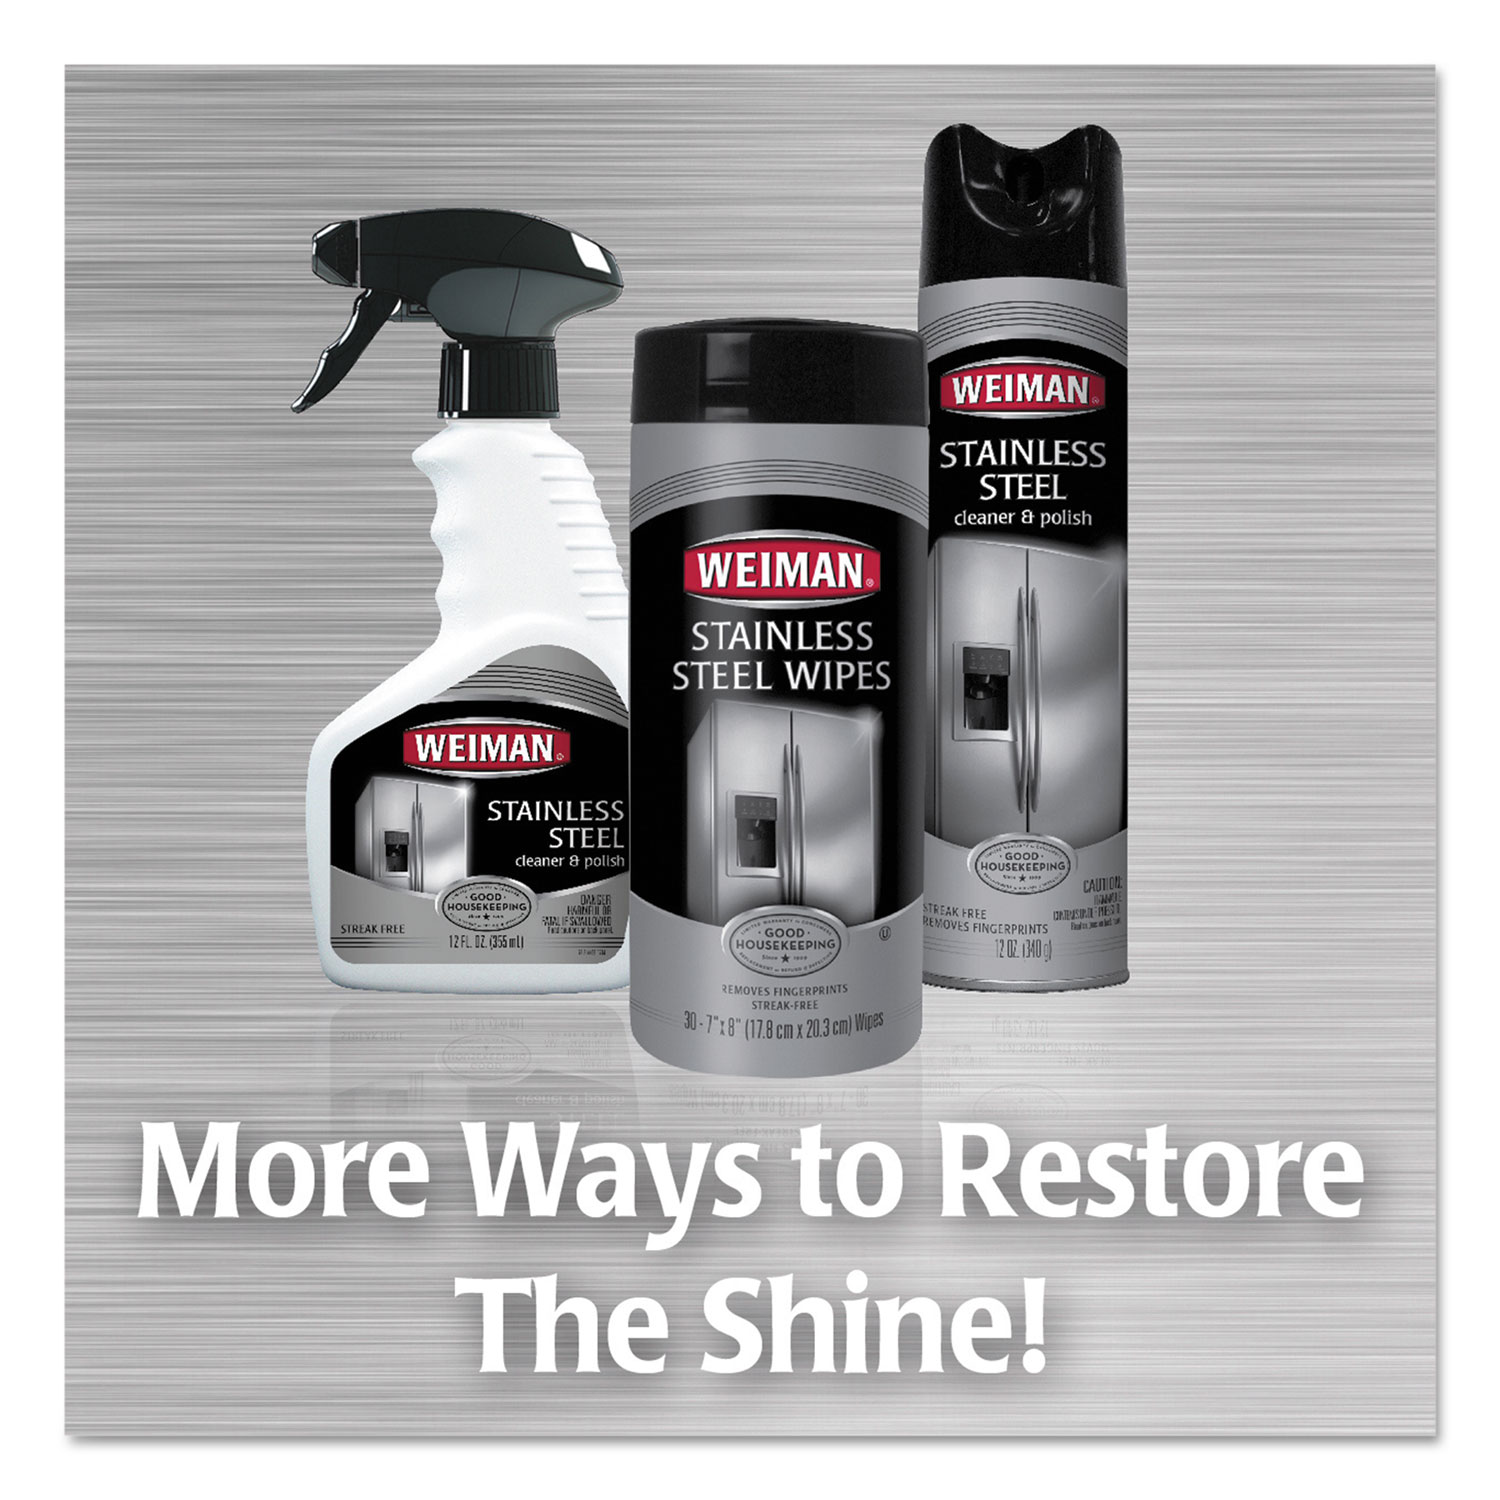 SSS® Stainless Steel Cleaner & Polish - 15 oz.